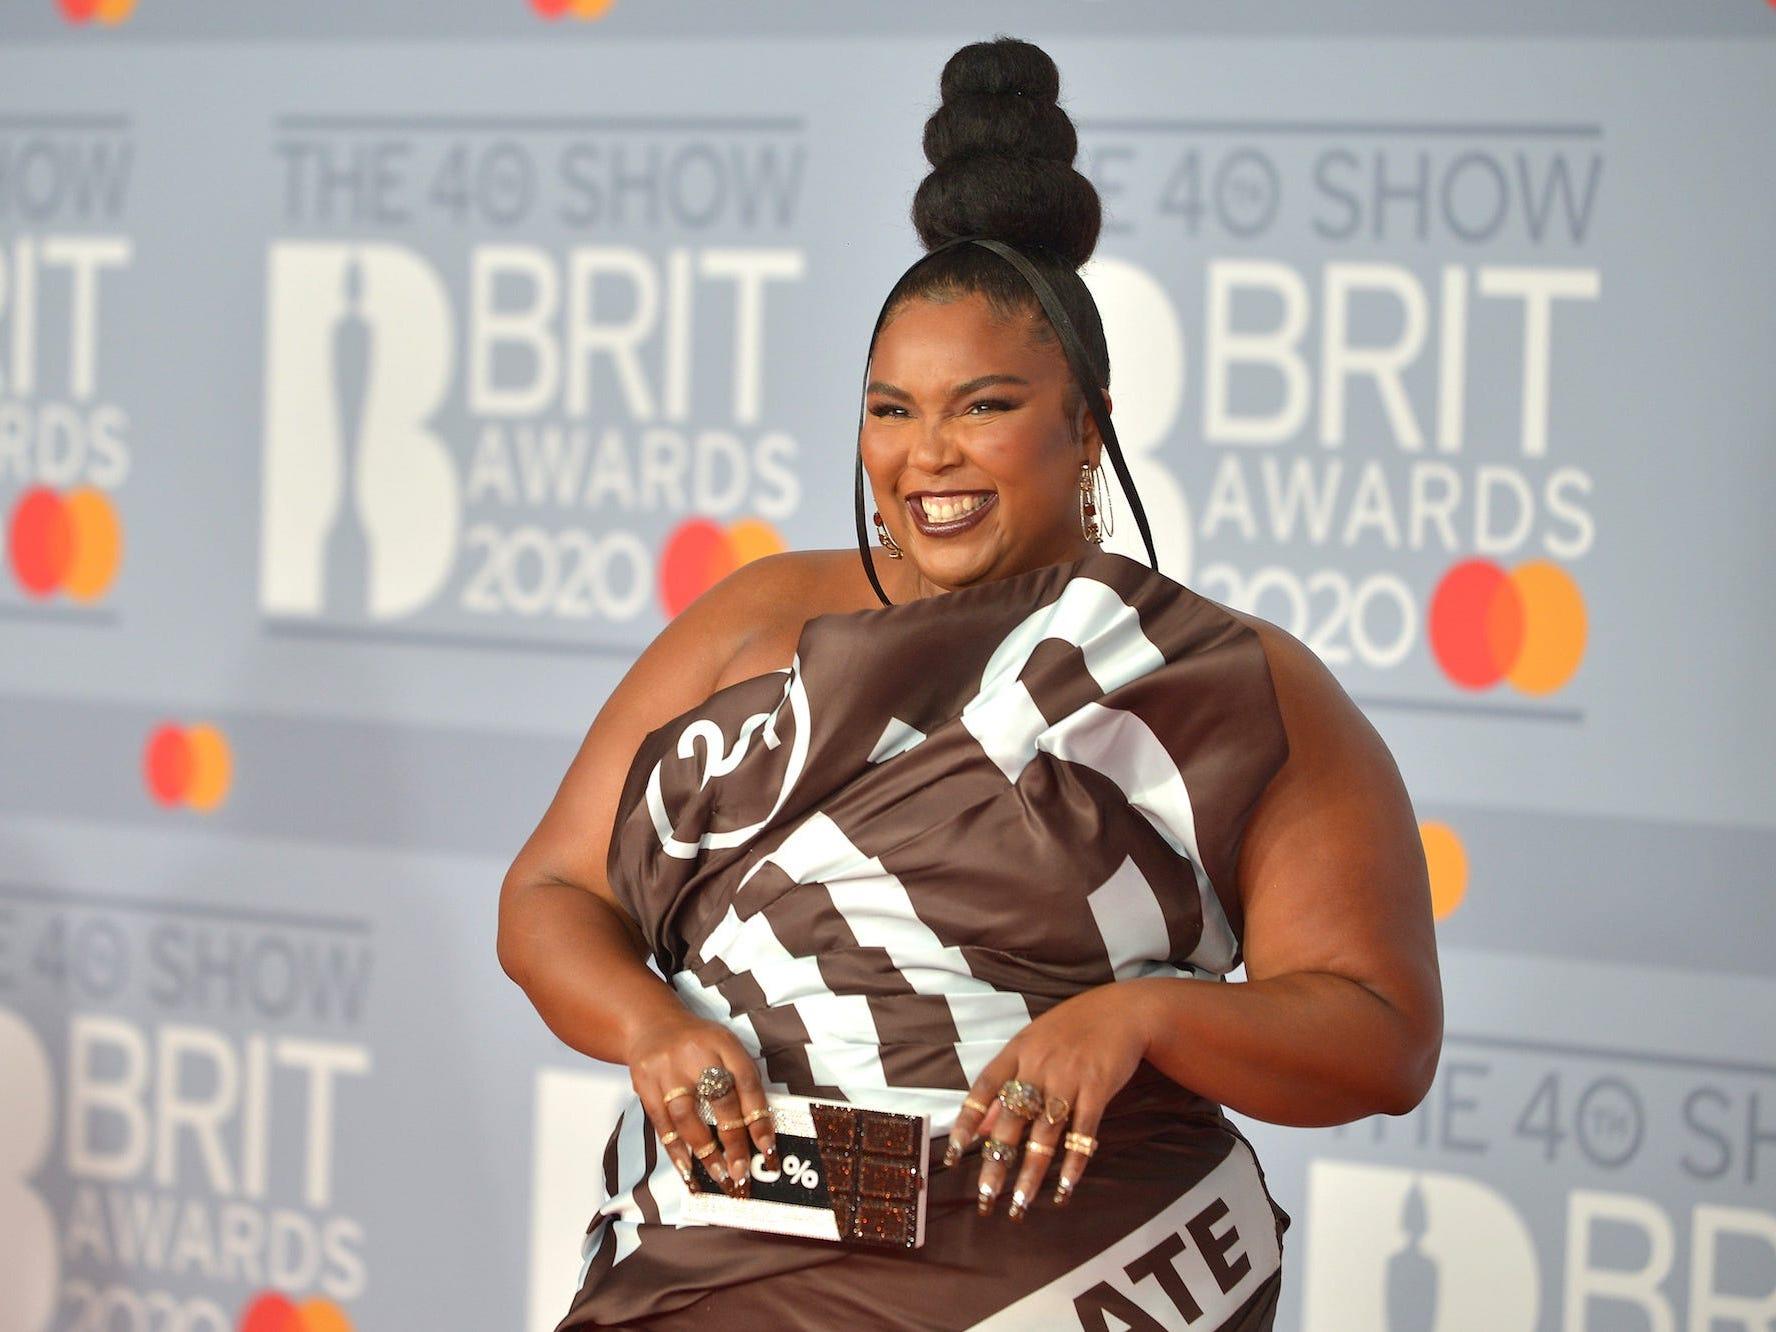 https://www.businessinsider.in/photo/77918263/lizzo-shared-a-video-of-herself-dancing-in-a-sparkly-see-through-top-and-high-waisted-underwear.jpg?imgsize=178044